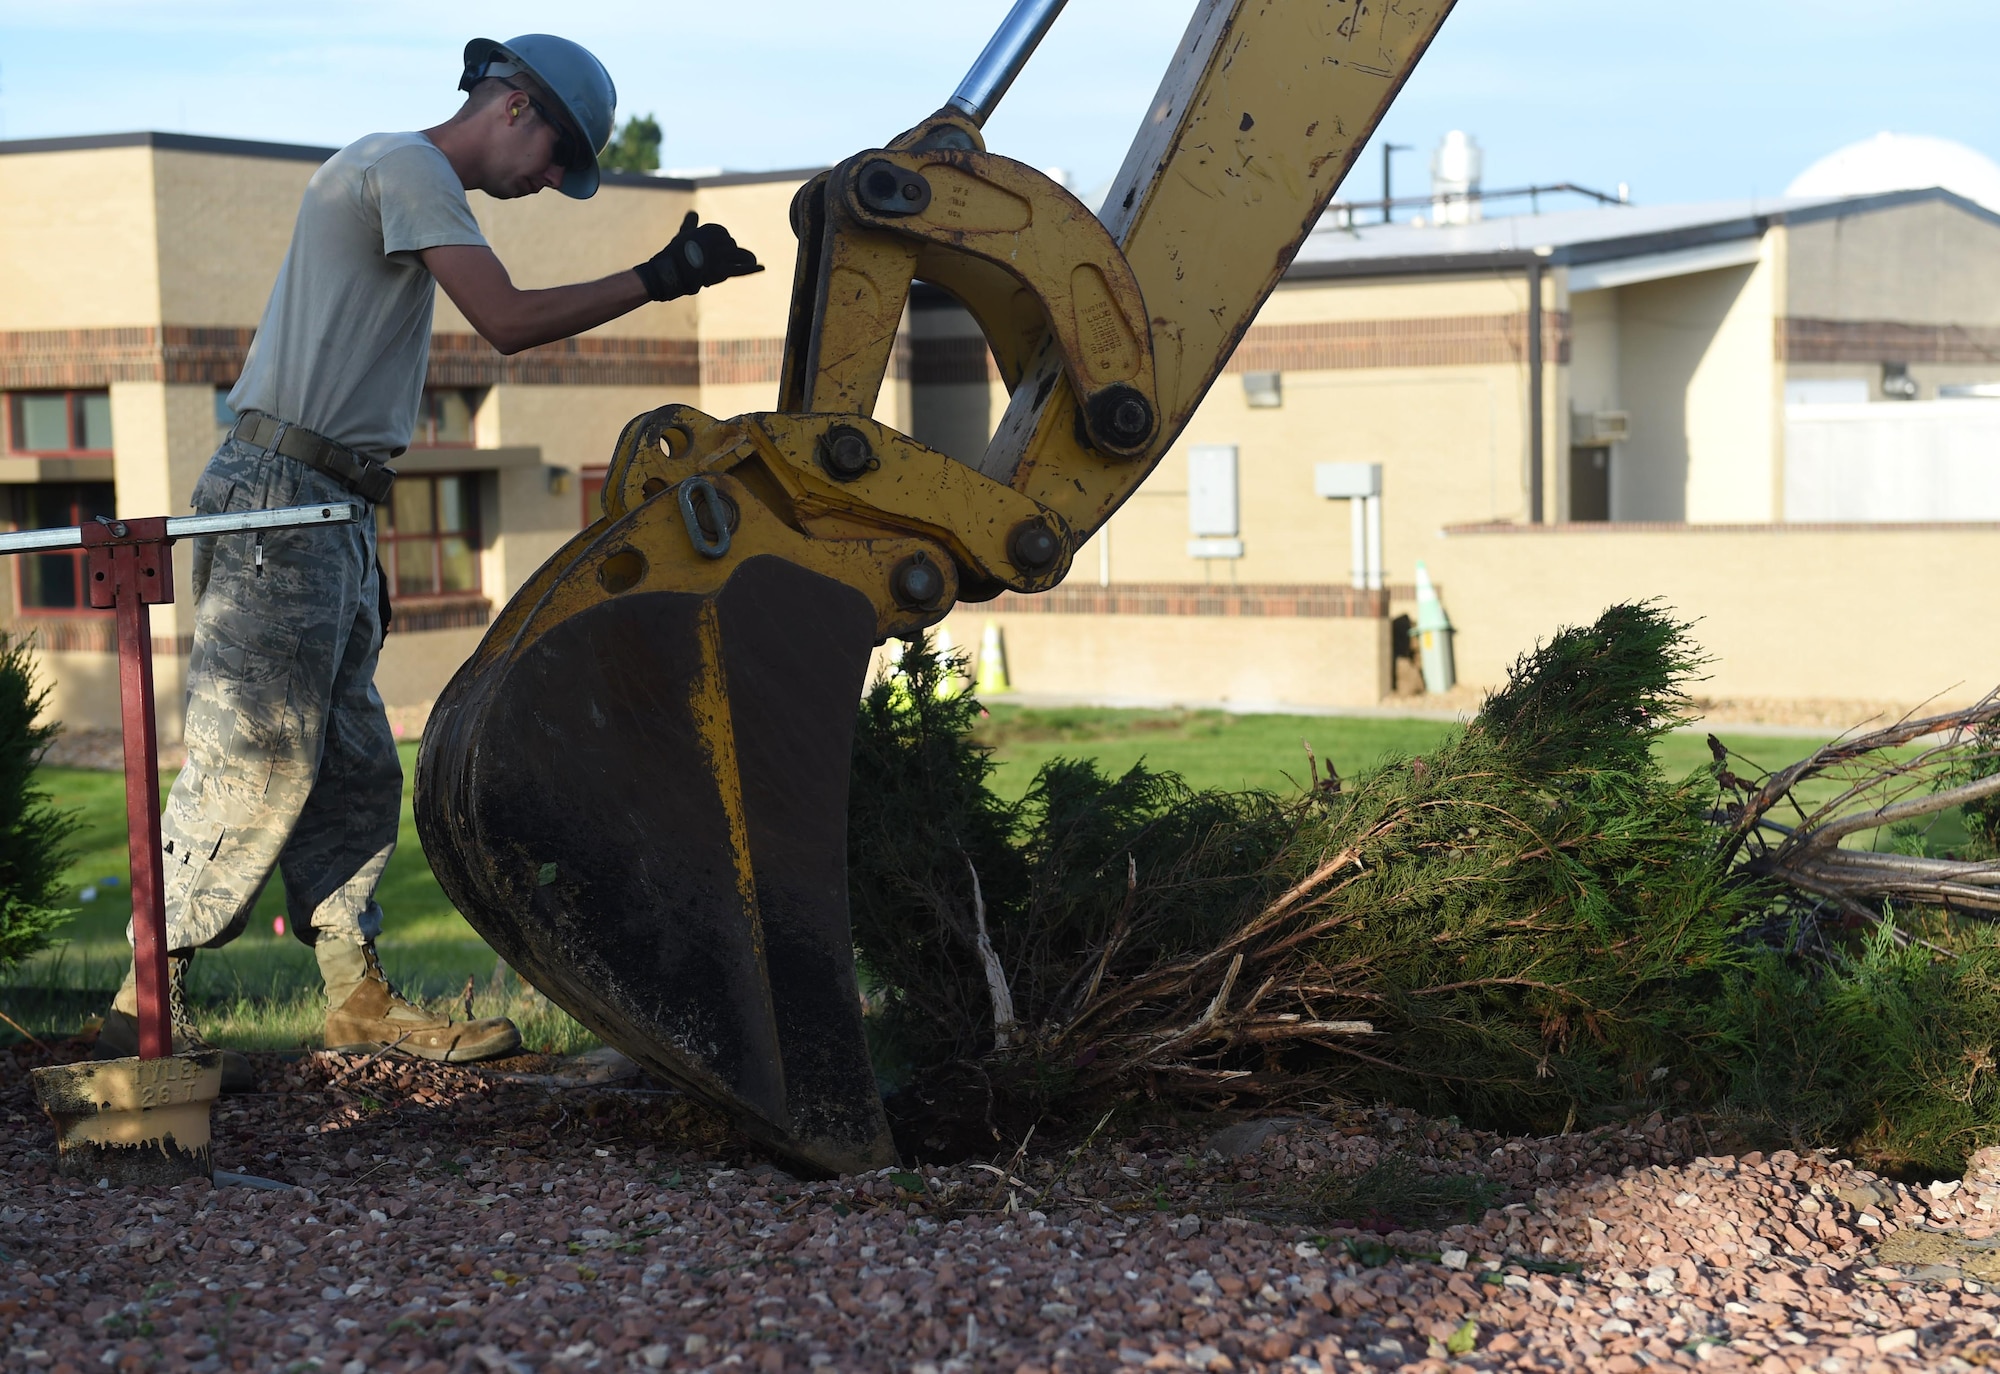 A 460th Civil Engineer Squadron member works on repairing a gas leak outside of Panther Den Aug. 7, 2015, on Buckley Air Force Base, Colo. The gas leak caused a temporary re-route of traffic on Aspen Road between Devils Thumb Avenue and Keystone Avenue and closed Panther Den for part of the day.  (U.S. Air Force photo by Airman 1st Class Samantha Meadors/Released)